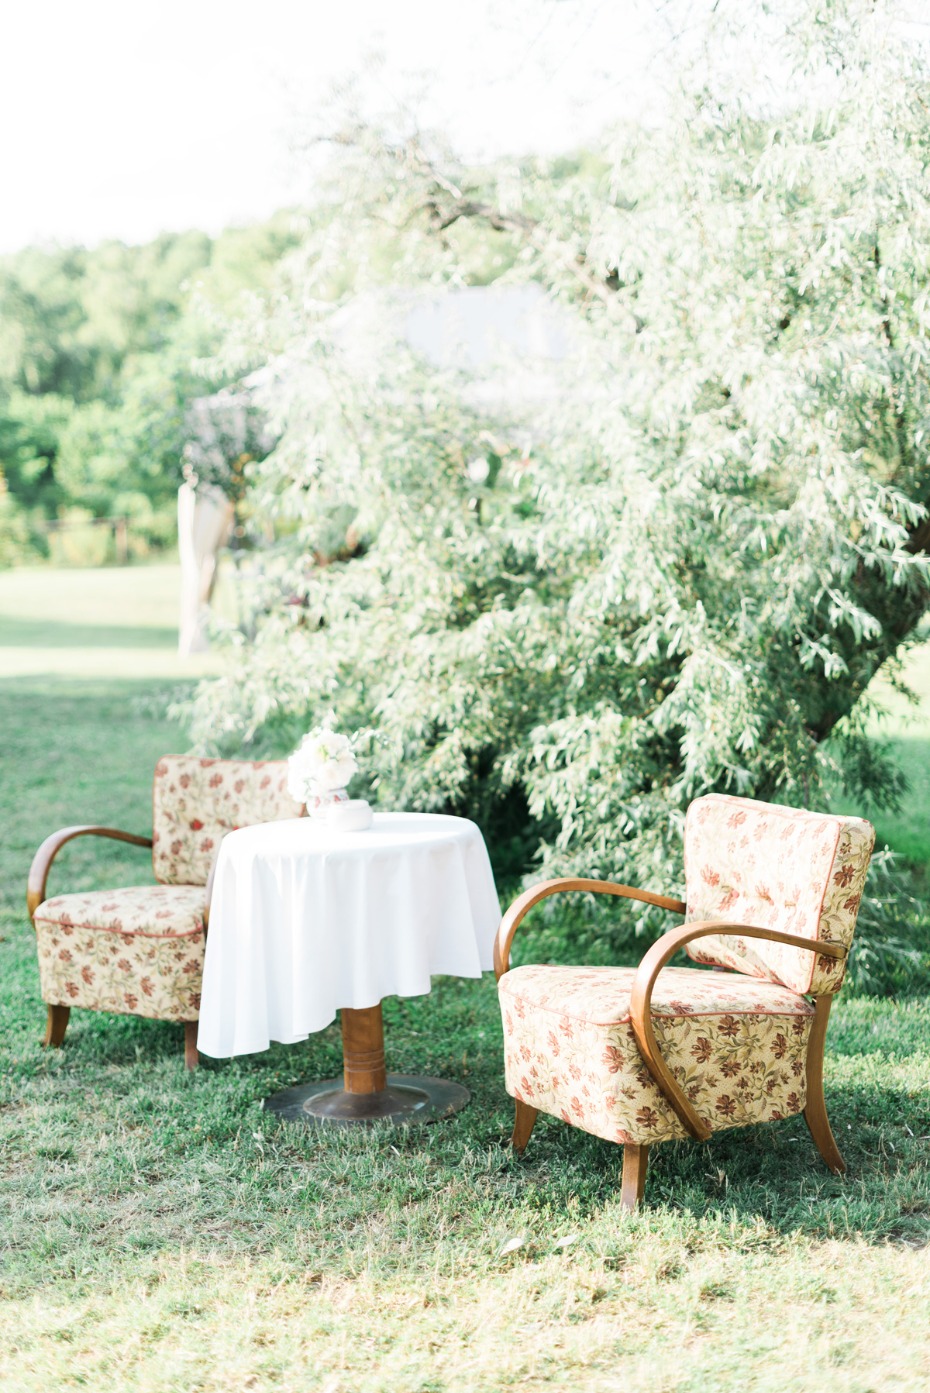 Outdoor seating area for a wedding